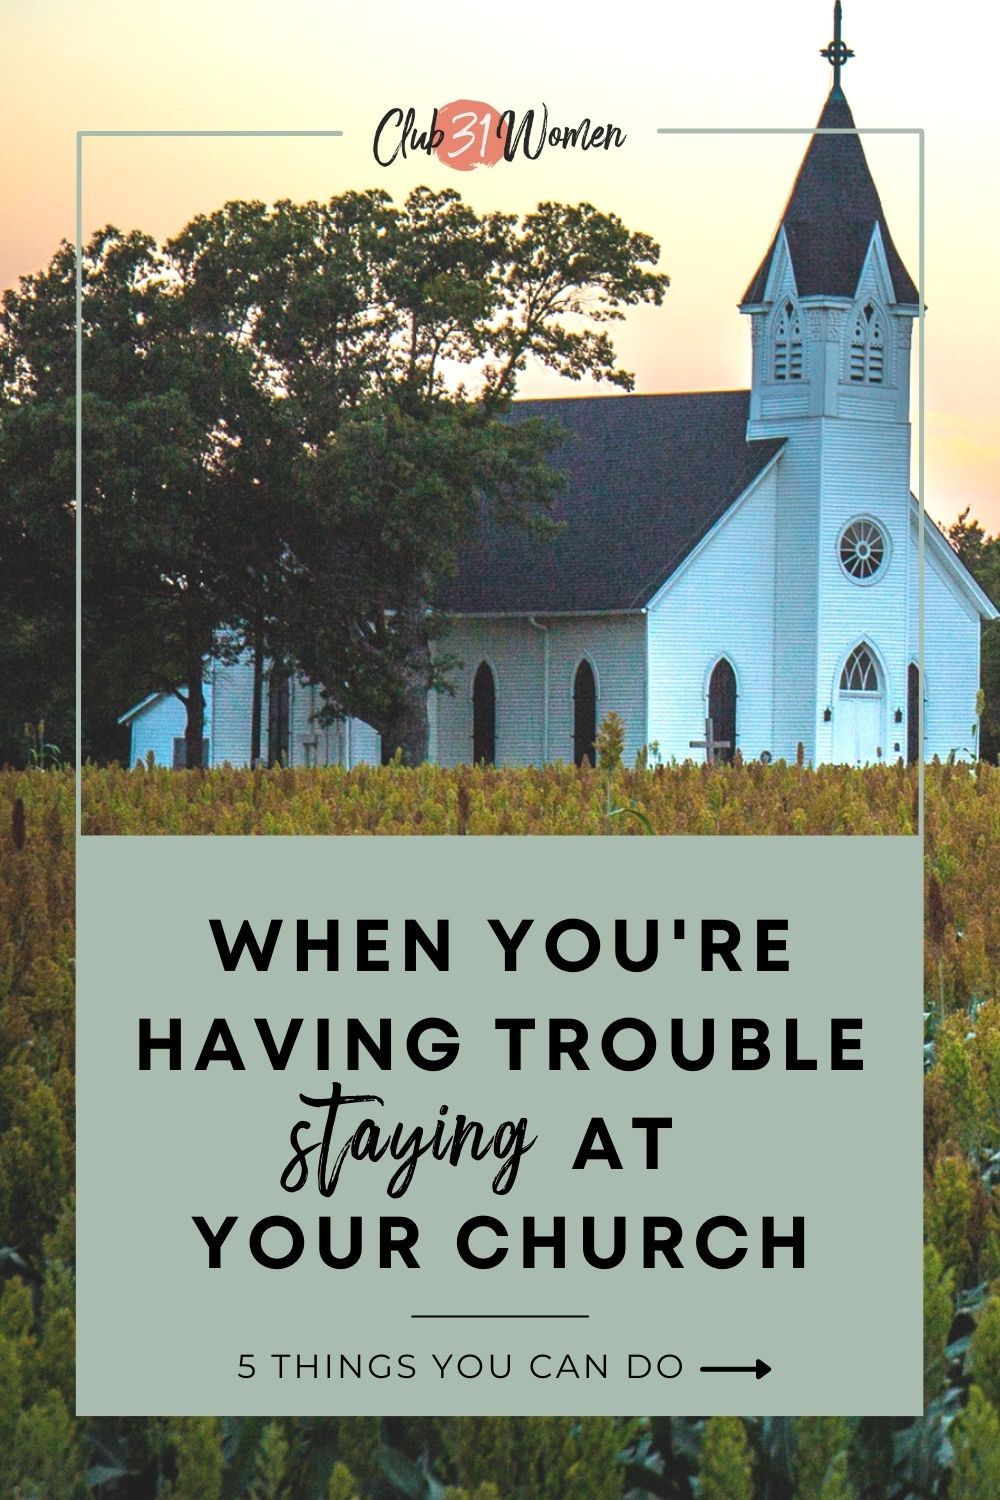 Church can feel hard sometimes because we are doing life alongside imperfect people. The glamour wears off. Do we leave or see it through? via @Club31Women